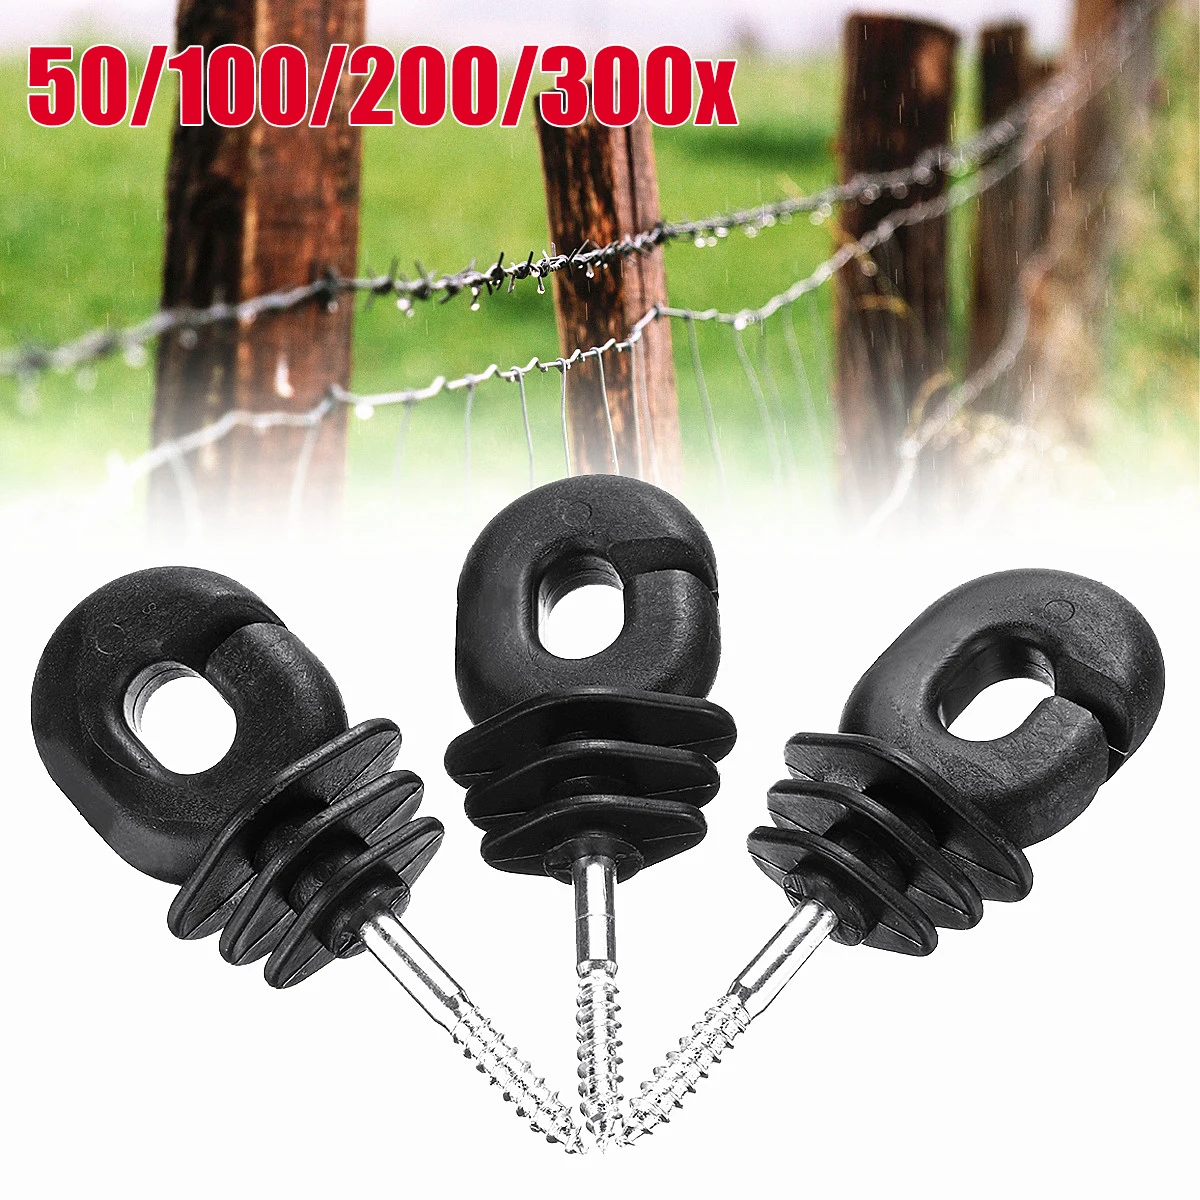 50 Pcs Screw In Insulator-Electric Fence Fencing Polywire Poly Wire Rope Wood